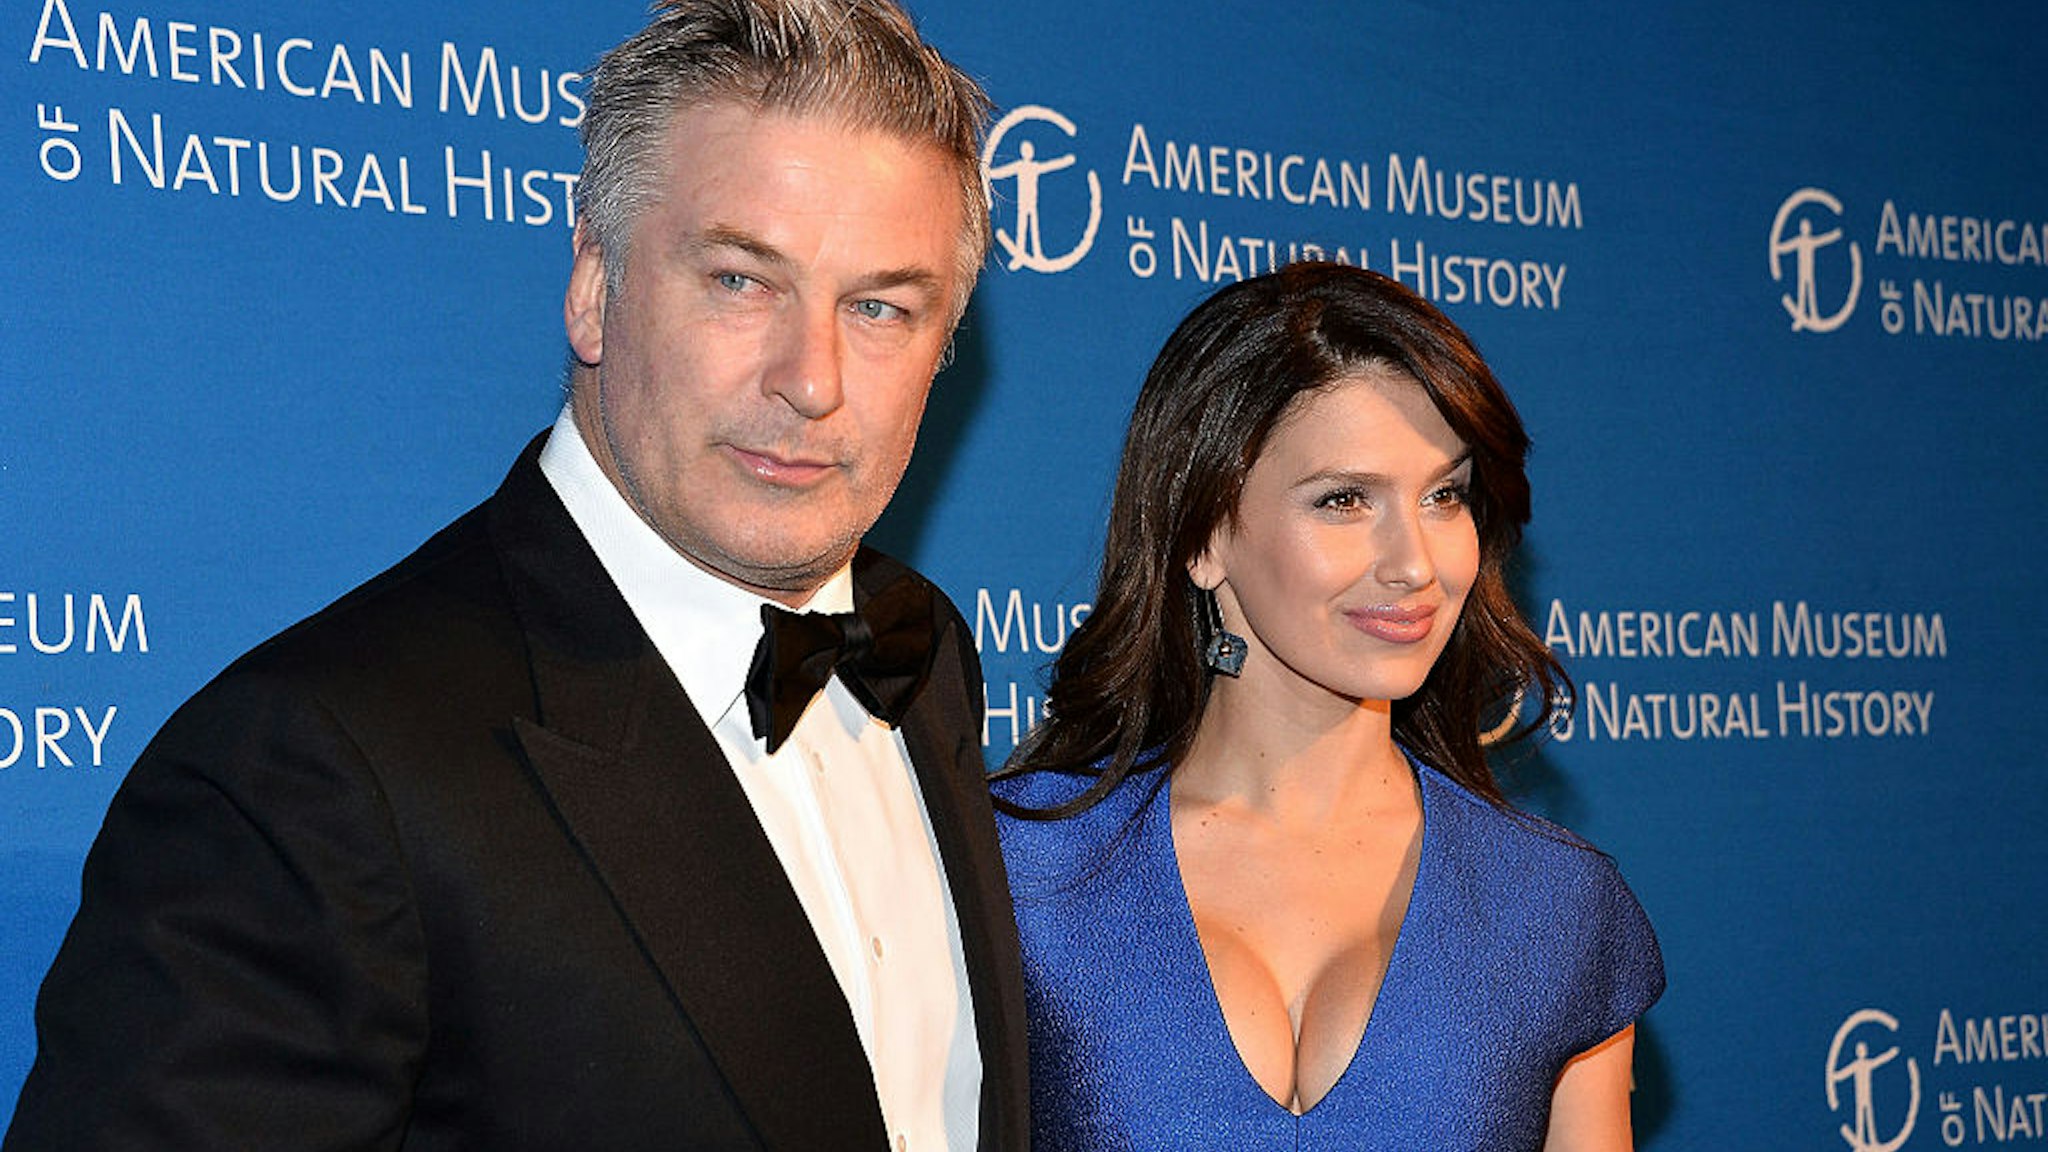 Alec Baldwin (L) and wife Hilaria Baldwin attend the 2016 American Museum of Natural History Museum Gala at the American Museum of Natural History on November 17, 2016 in New York City